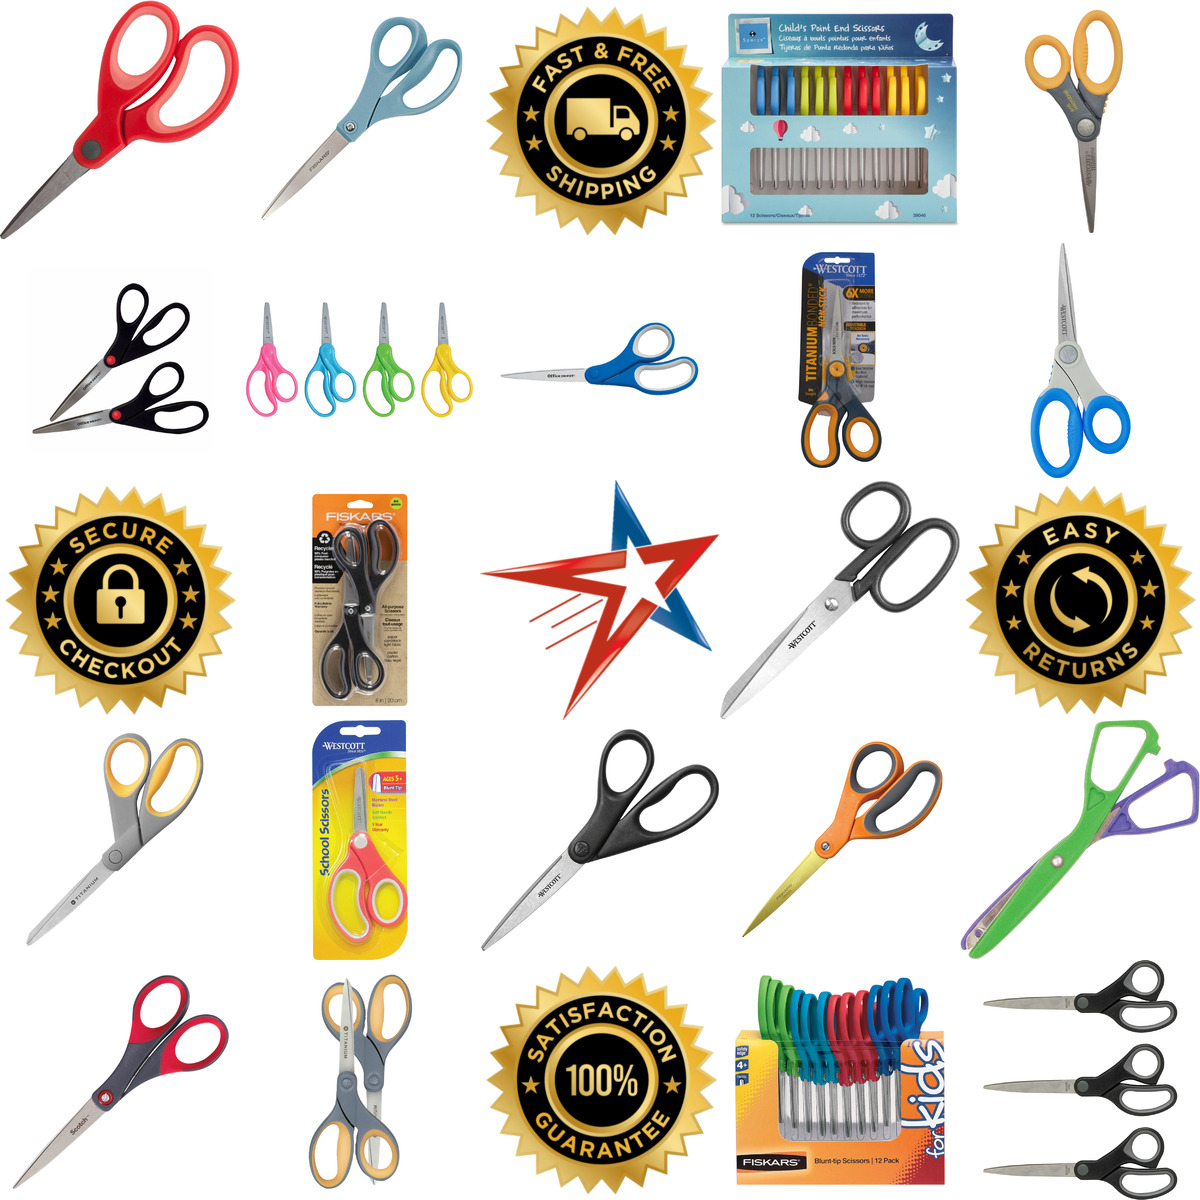 A selection of Scissors products on GoVets